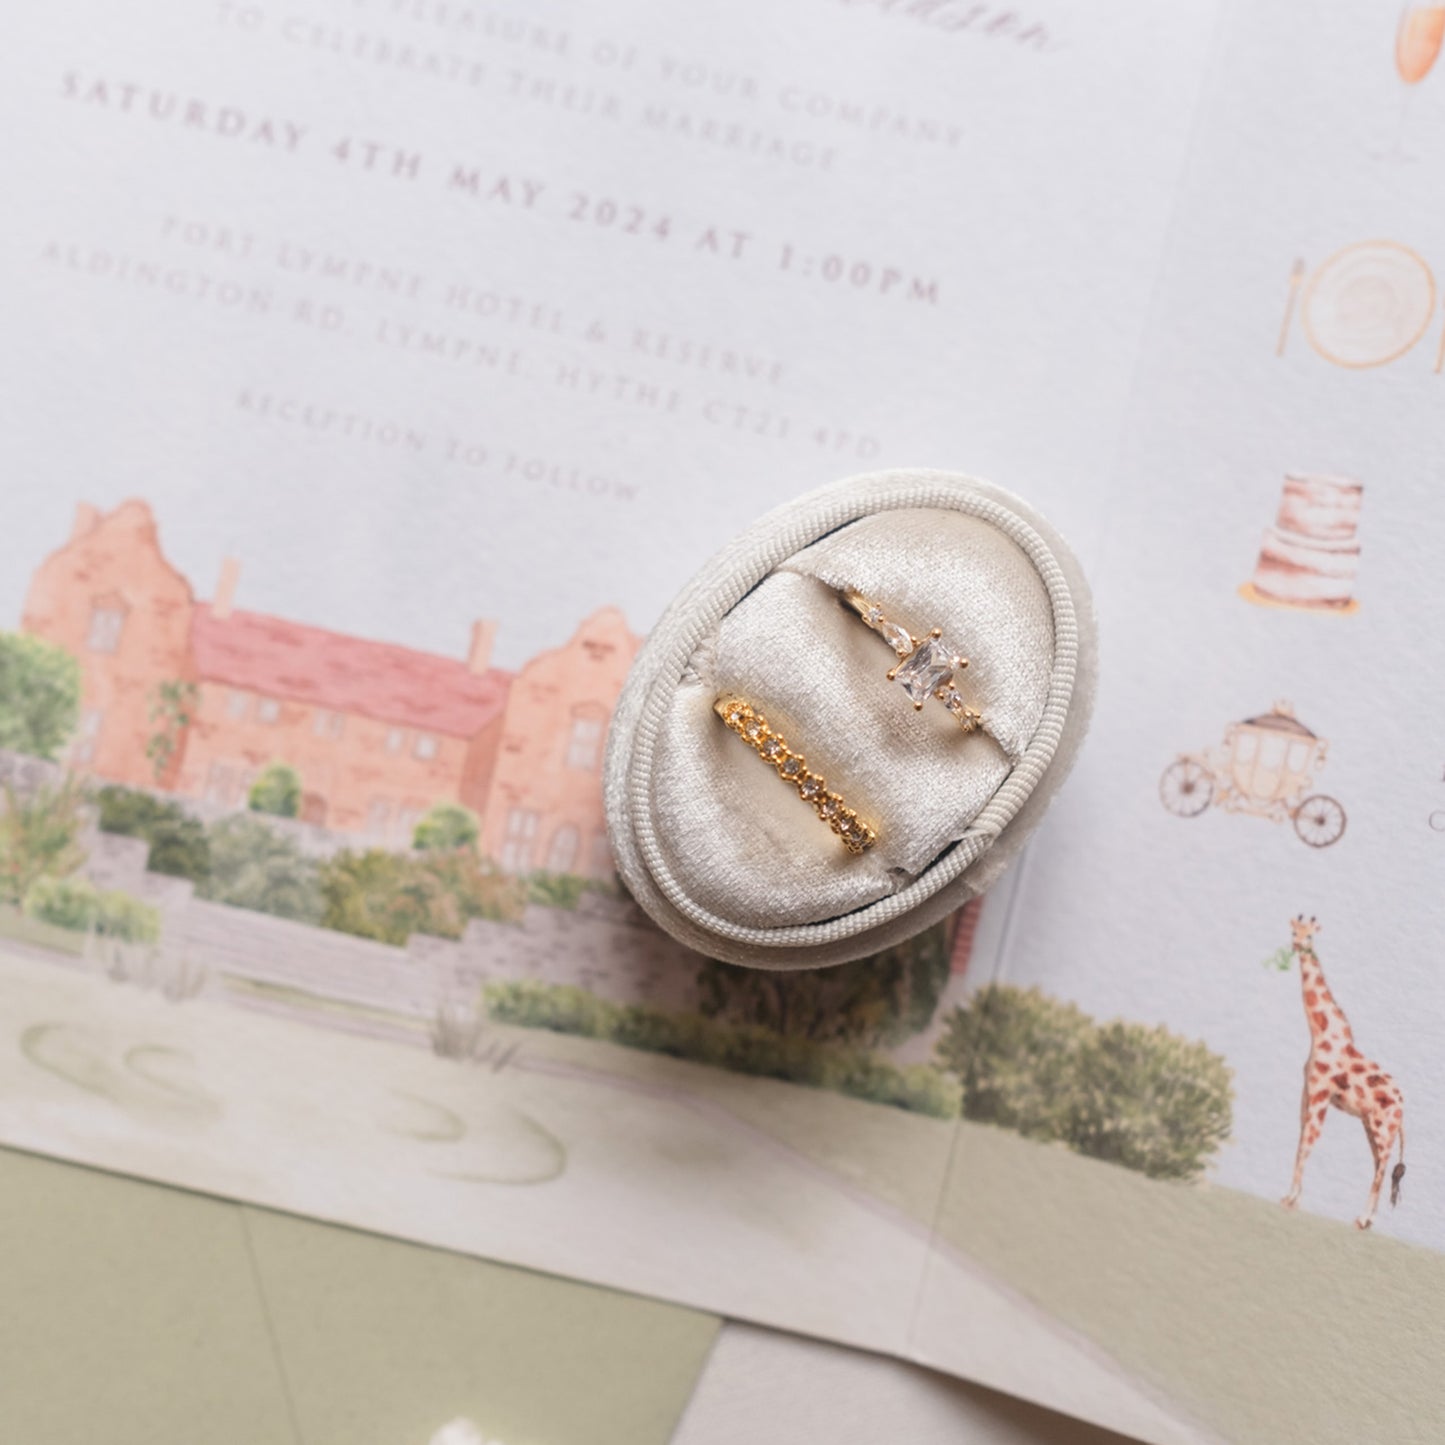 Rings with safari folded wedding invitation in background